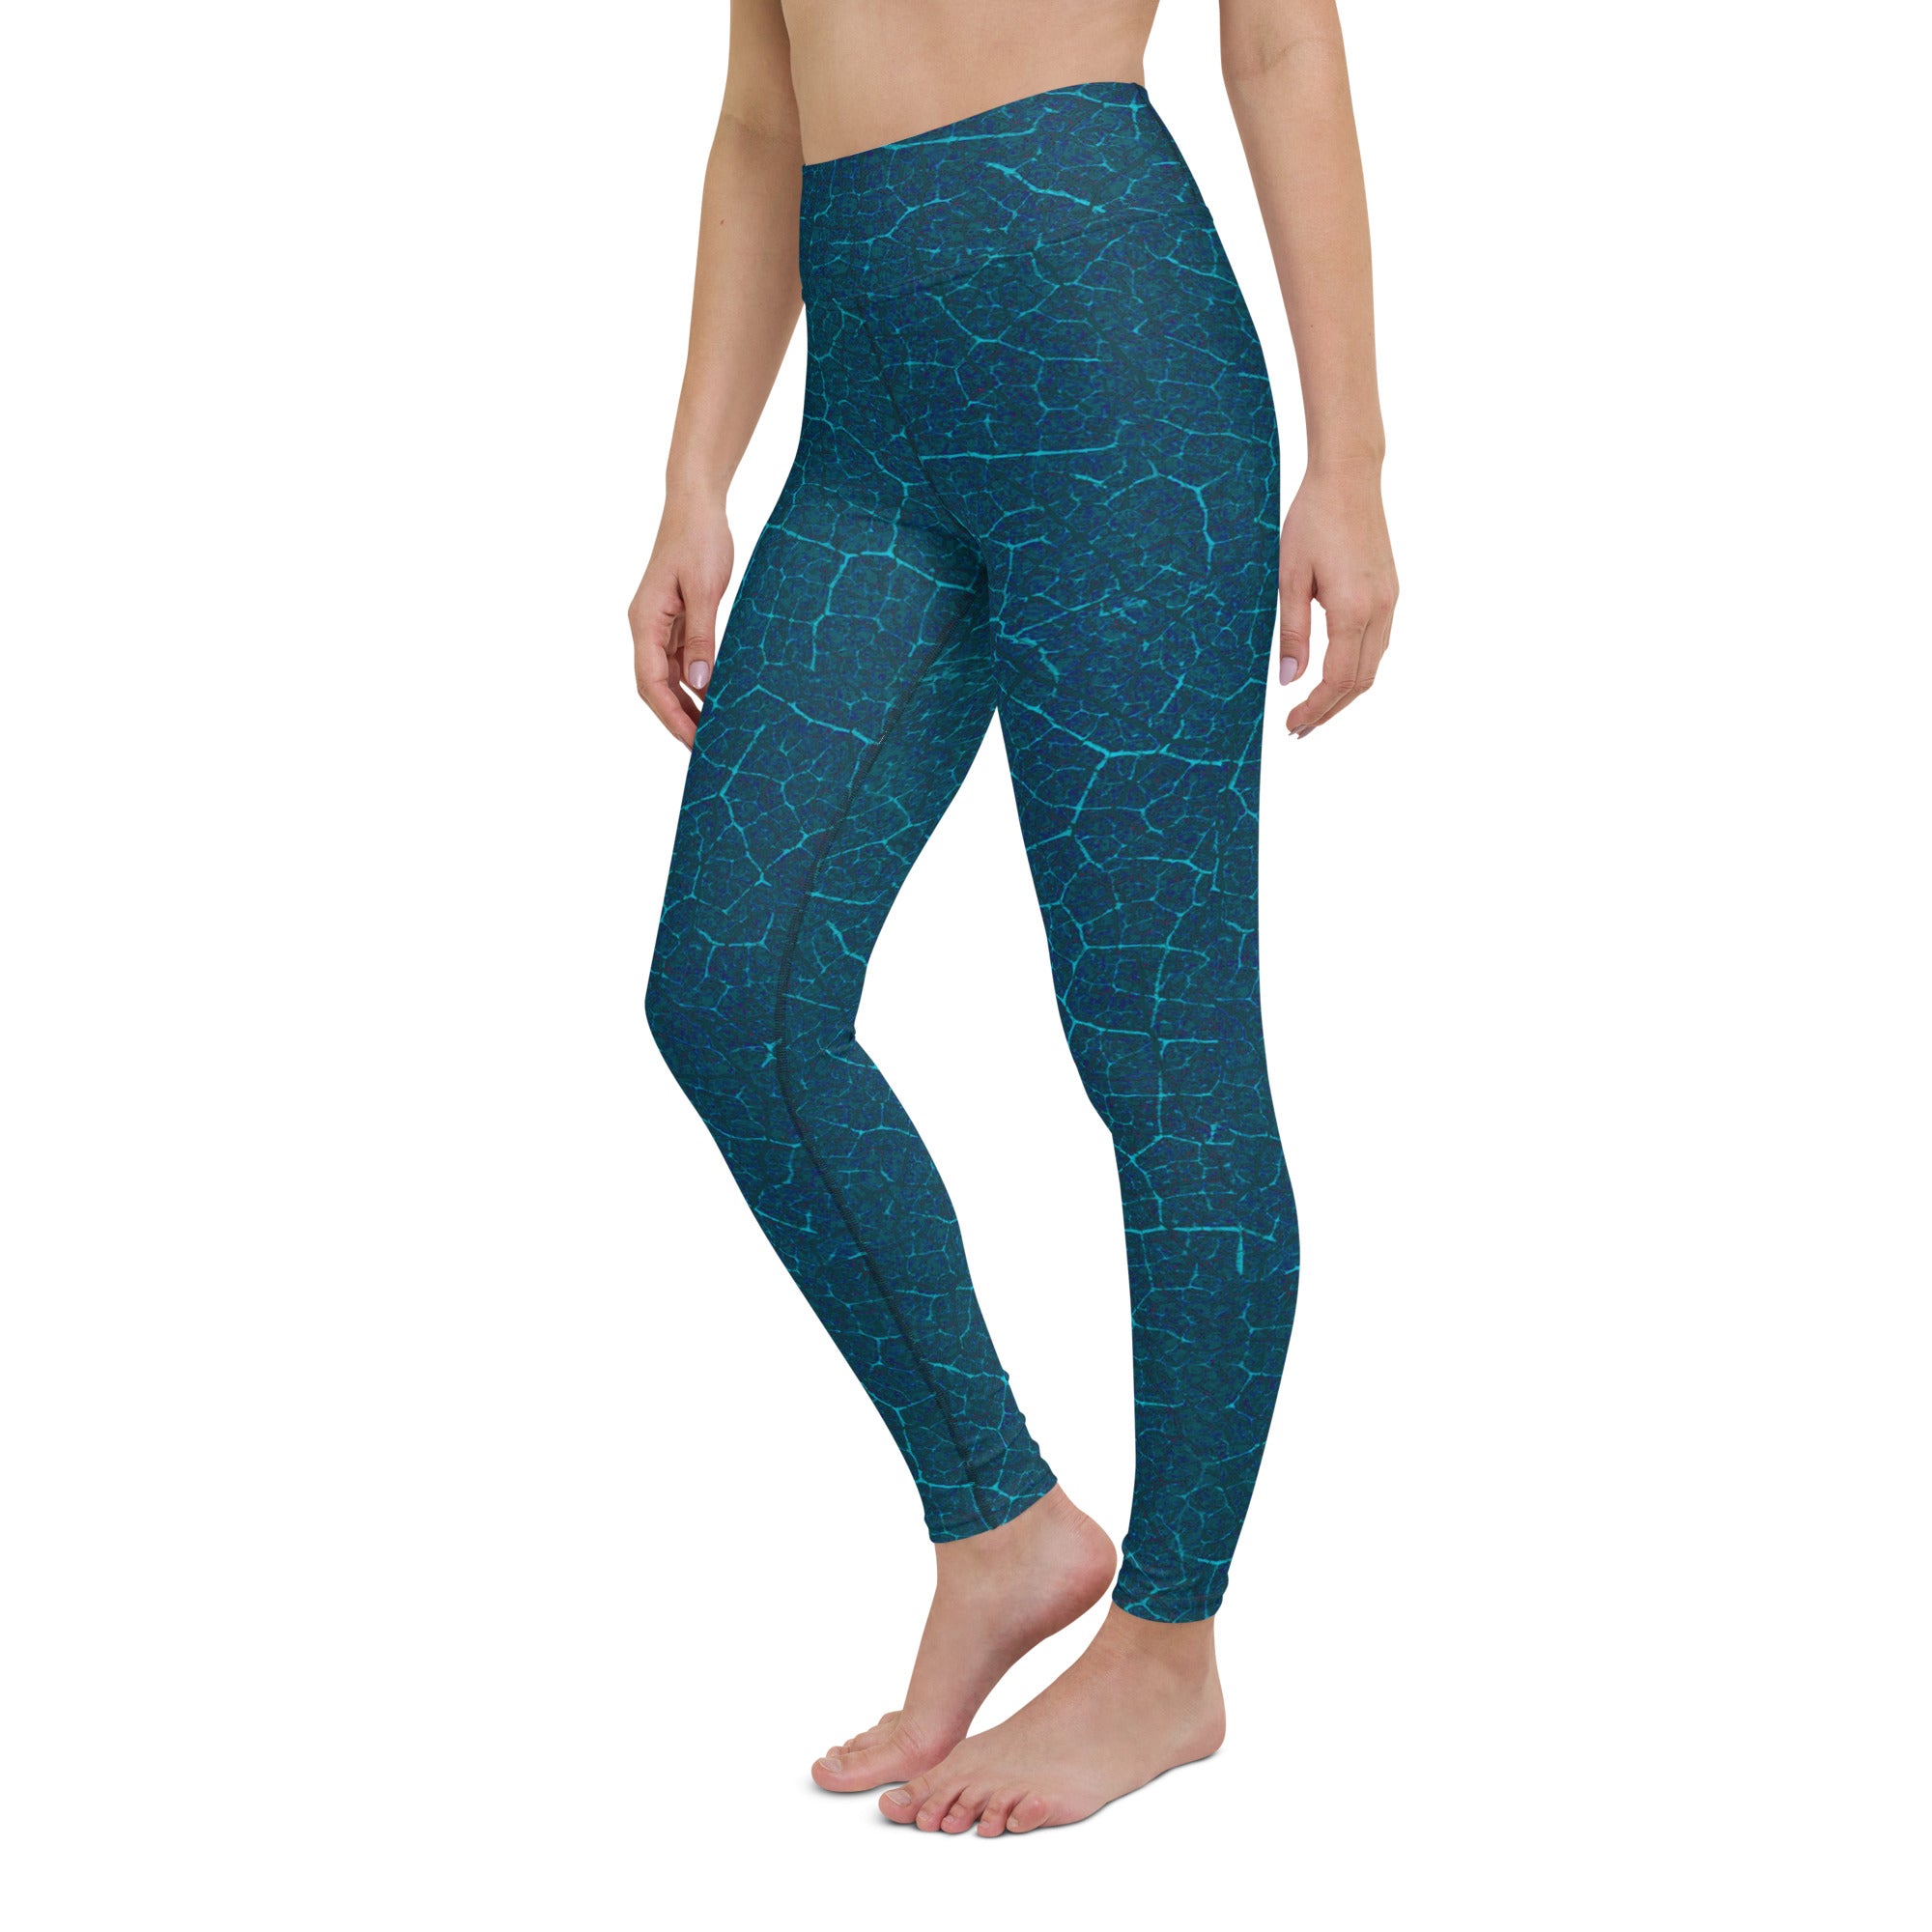 Outdoor yoga session in Enchanted Forest Yoga Leggings, merging practice with the beauty of mystical forest scenery.